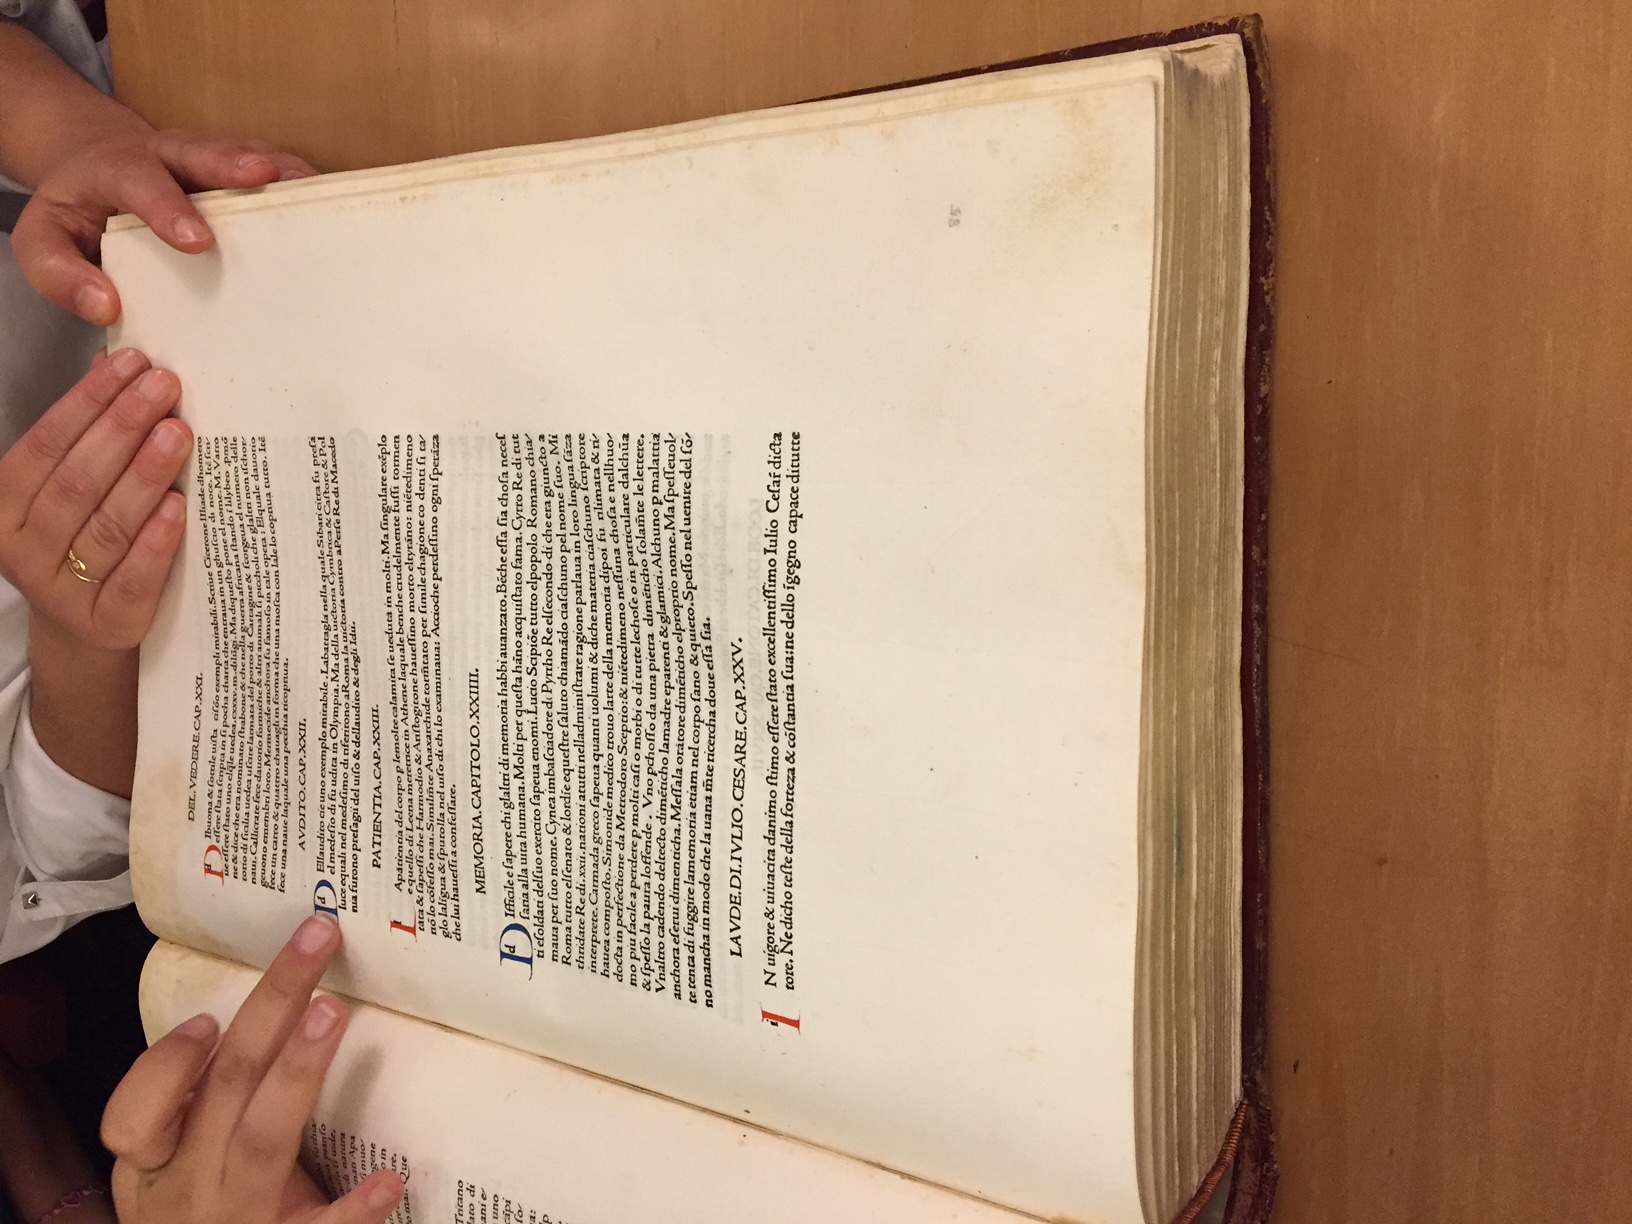 People checking text from an old book written in Latin.